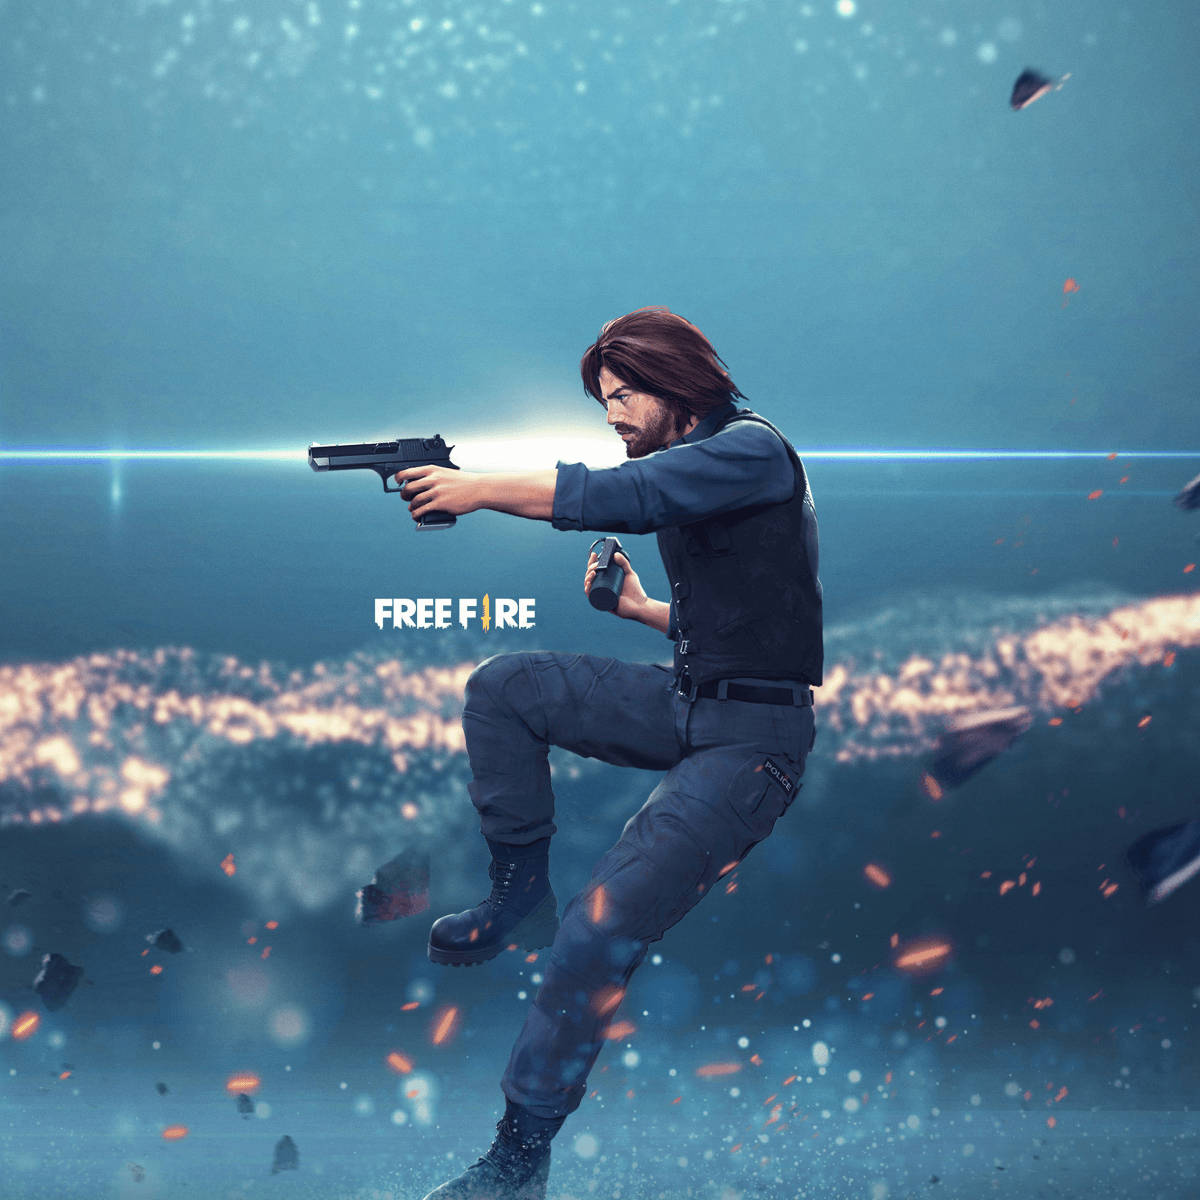 Shooting Andrew Free Fire Game Background